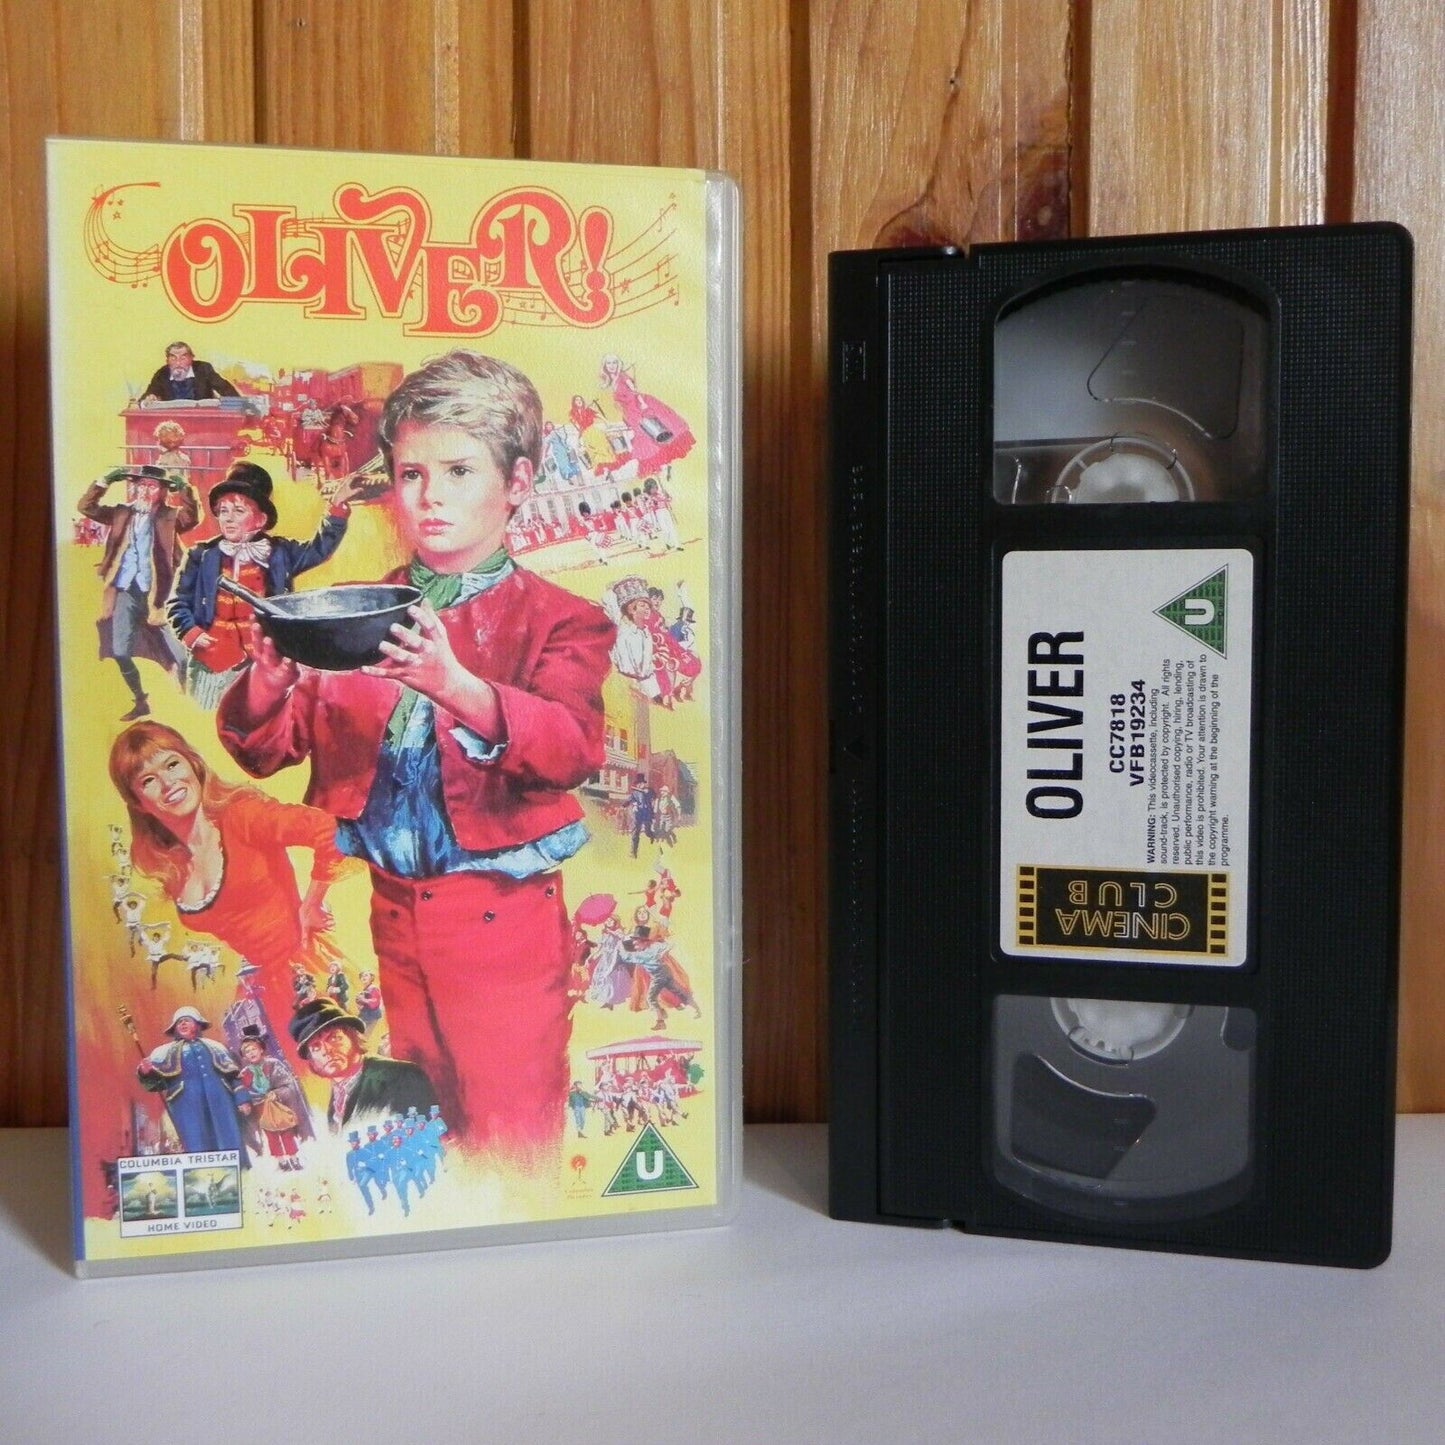 Oliver! - Columbia Tristar - Family - Musical - Ron Moody - Oliver Reed - VHS-